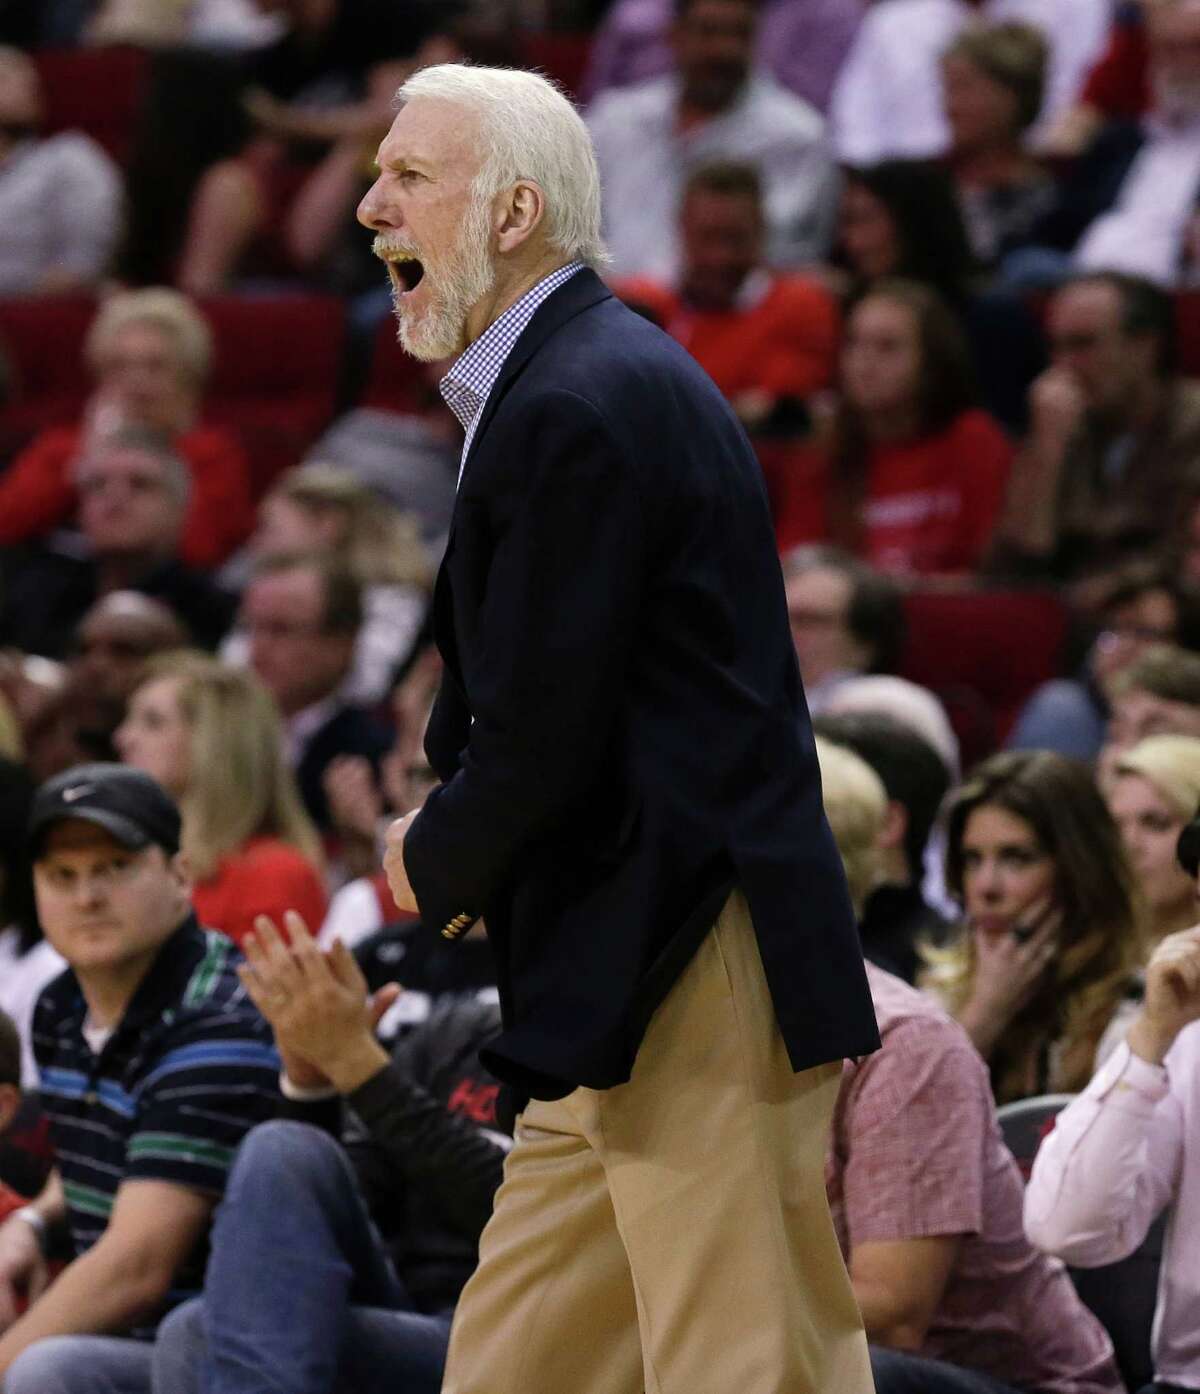 San Antonio Spours coach Gregg Popovich yells to the officials during the first half of the team's NBA basketball game against the Houston Rockets on Saturday, Feb. 27, 2016, in Houston. (AP Photo/Bob Levey)